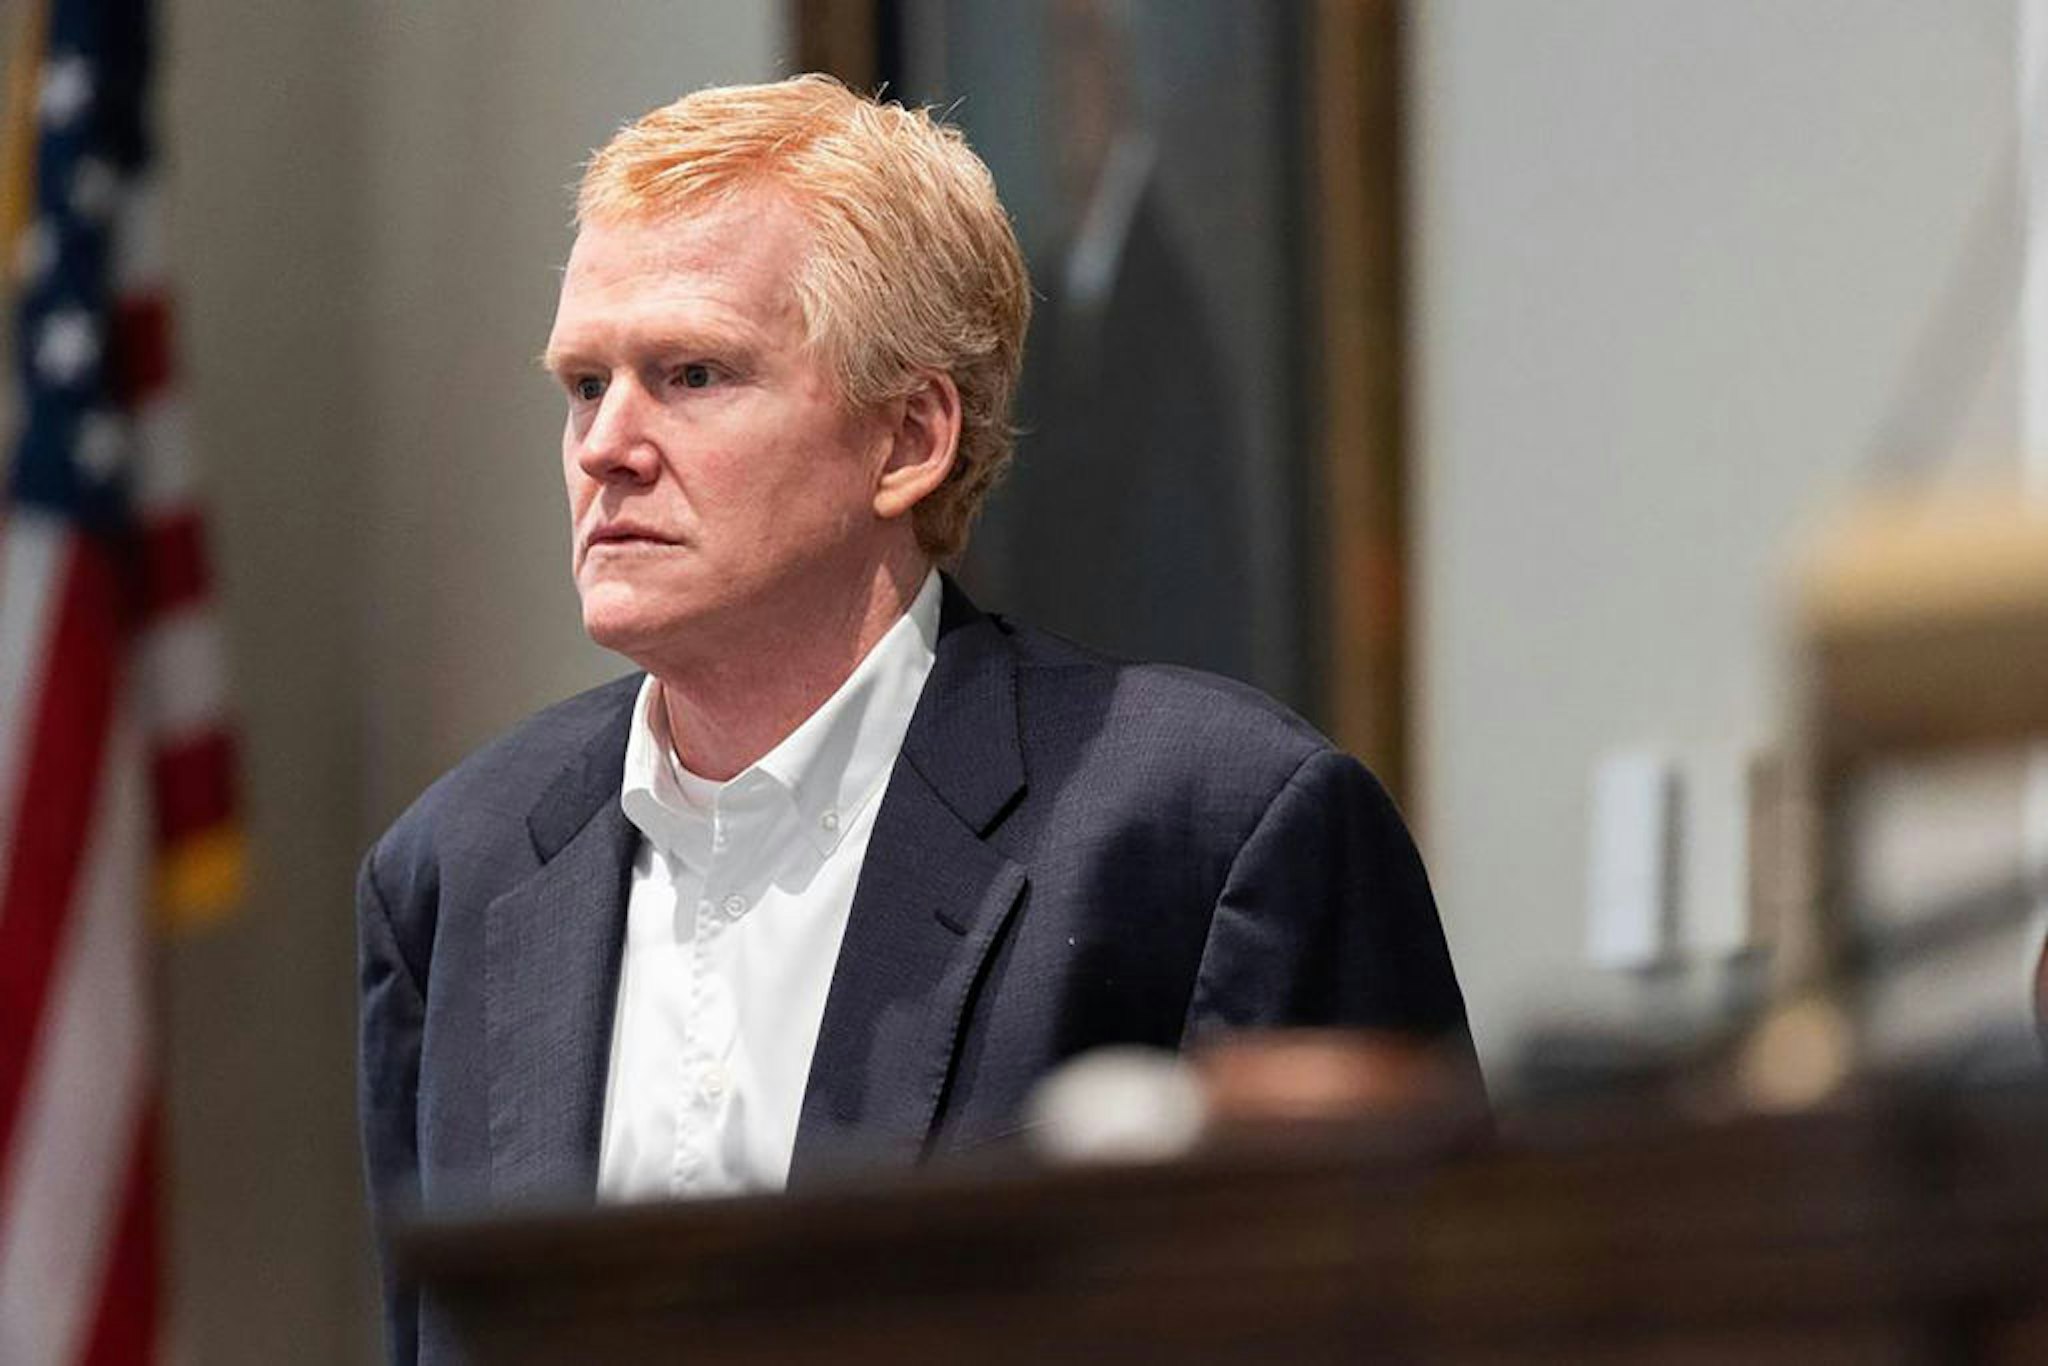 Alex Murdaugh stands next to the witness booth during a break in his trial for murder at the Colleton County Courthouse on Thursday, Feb. 23, 2023.